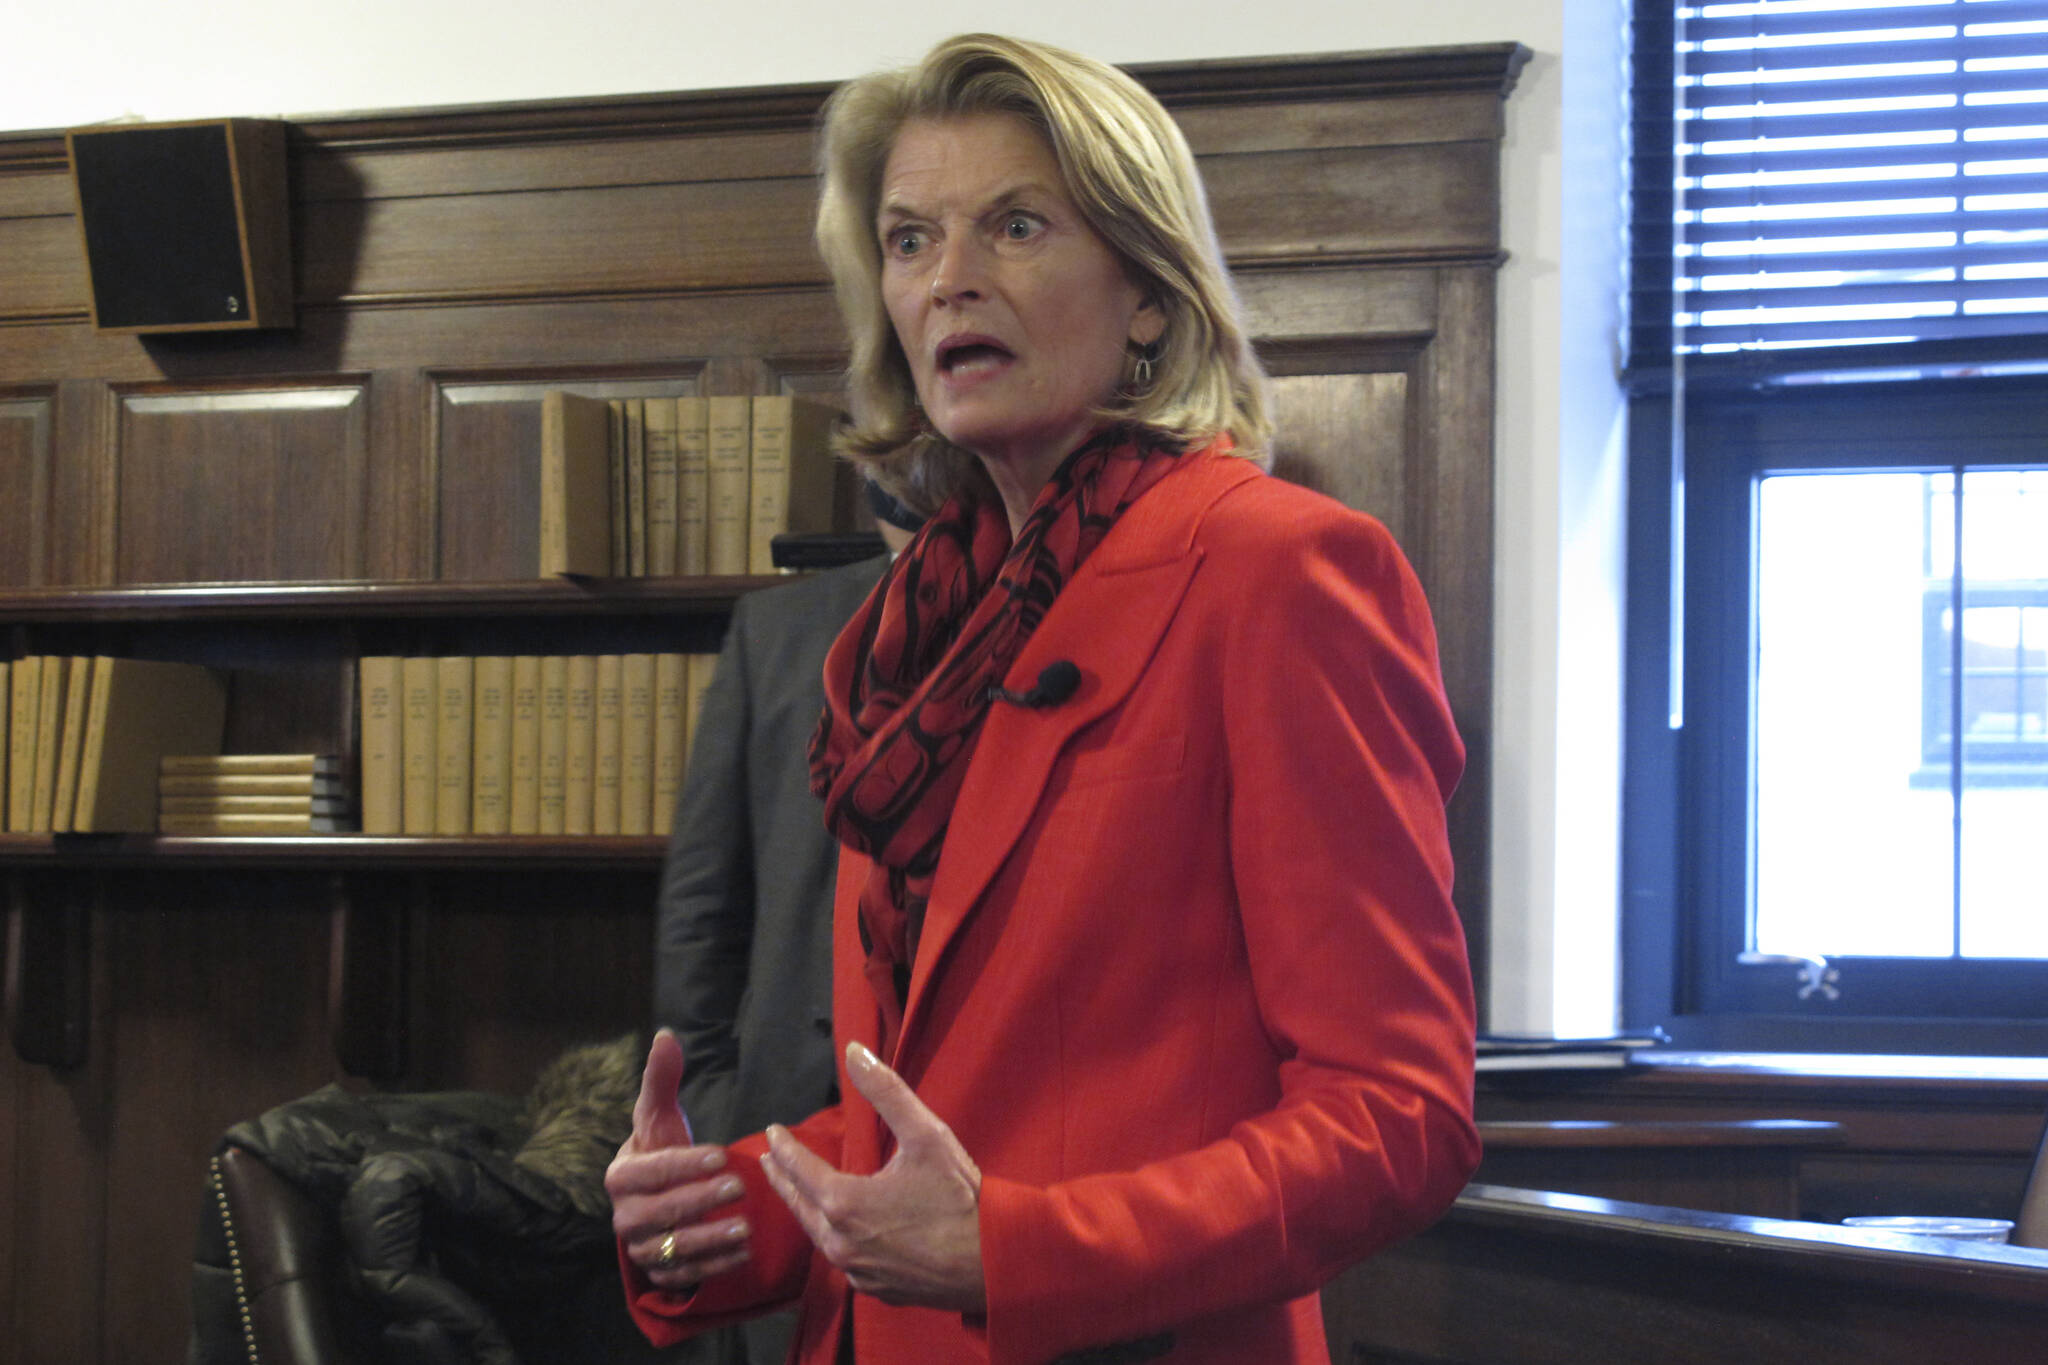 Sen. Lisa Murkowski, R-Alaska, speaks to reporters in the state Capitol on Tuesday. Murkowski spoke to reporters after giving a speech to a joint session of the Legislature. (AP Photo / Becky Bohrer)